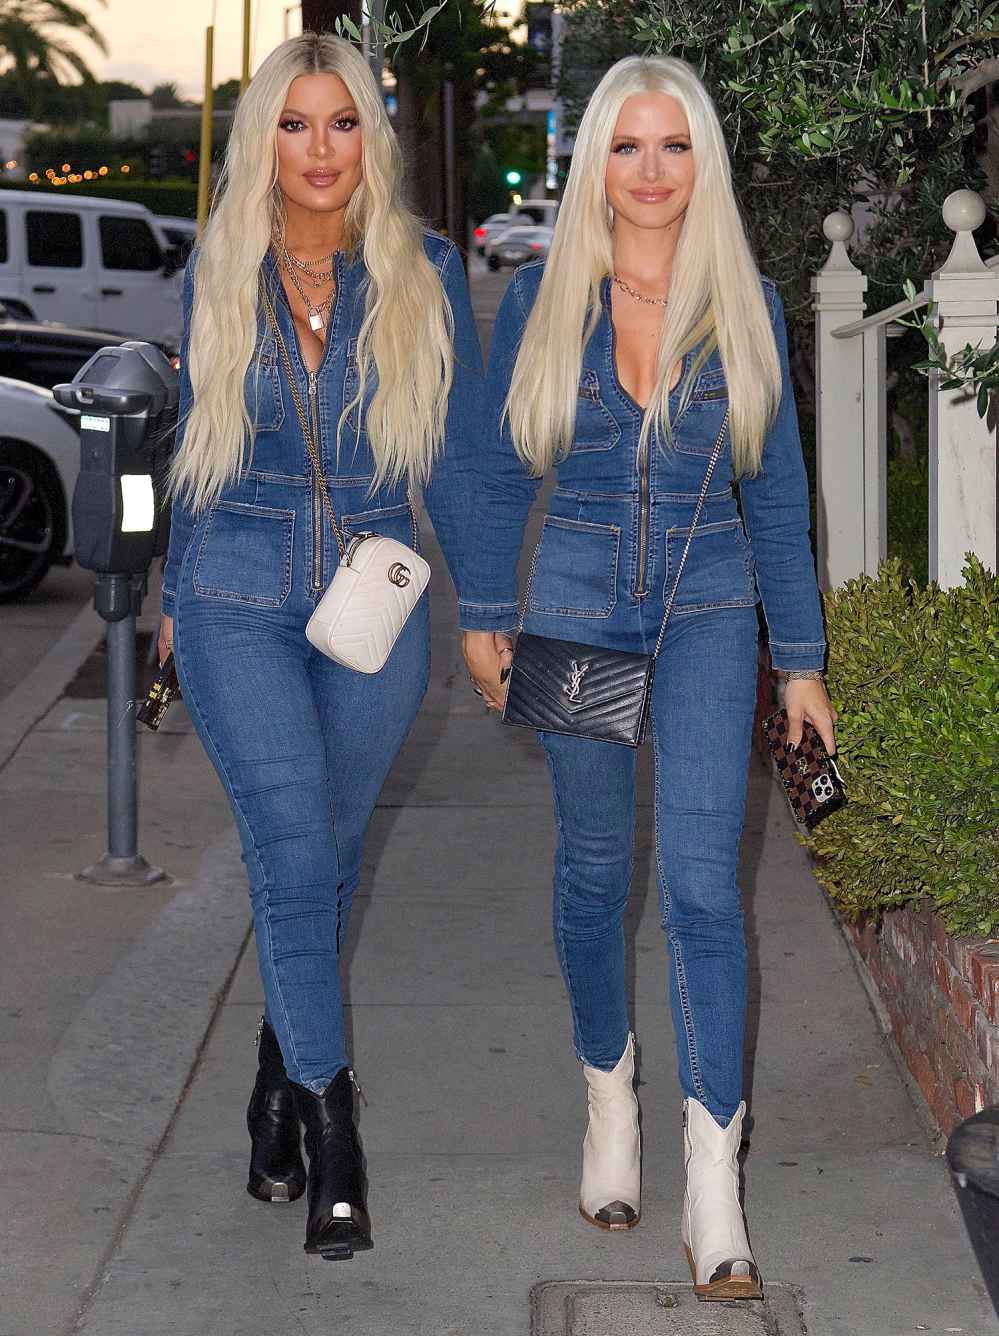 Tori Spelling Reacts to Khloe Kardashian Comparisons After Twinning Looks Go Viral 2